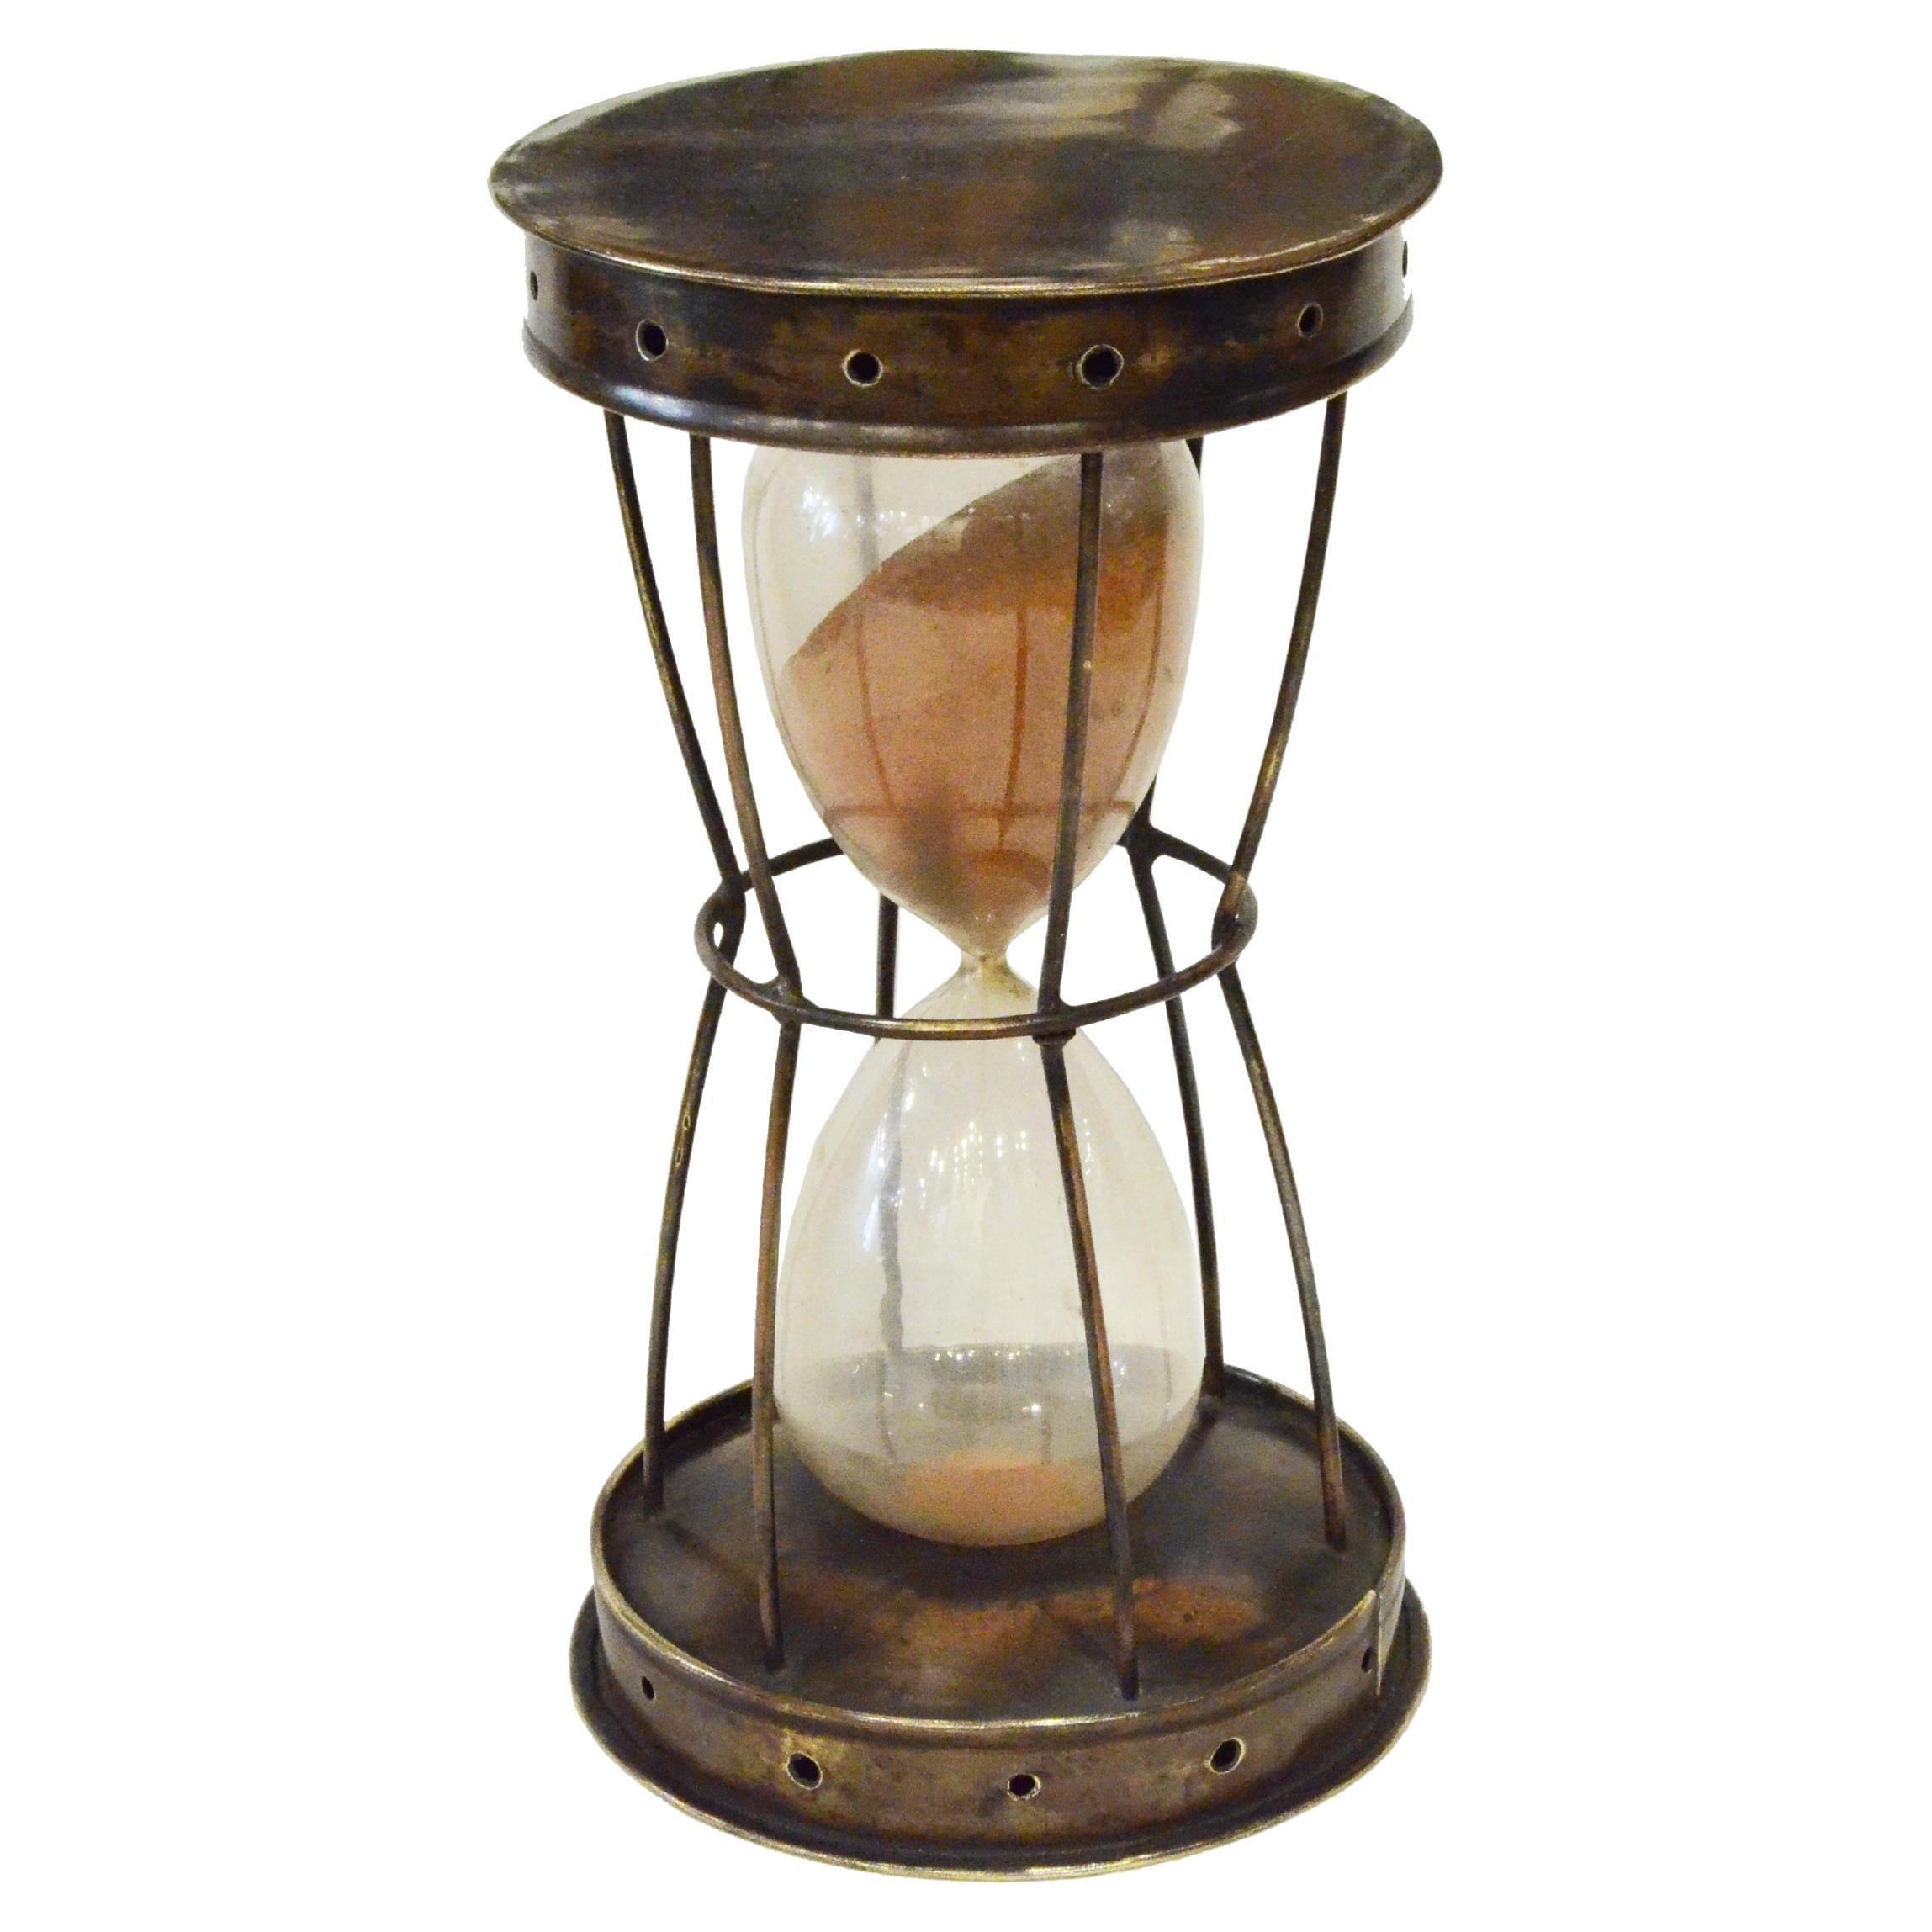 End XIX Century Brass and Glass Hourglass Antique Time Measuring Instrument For Sale